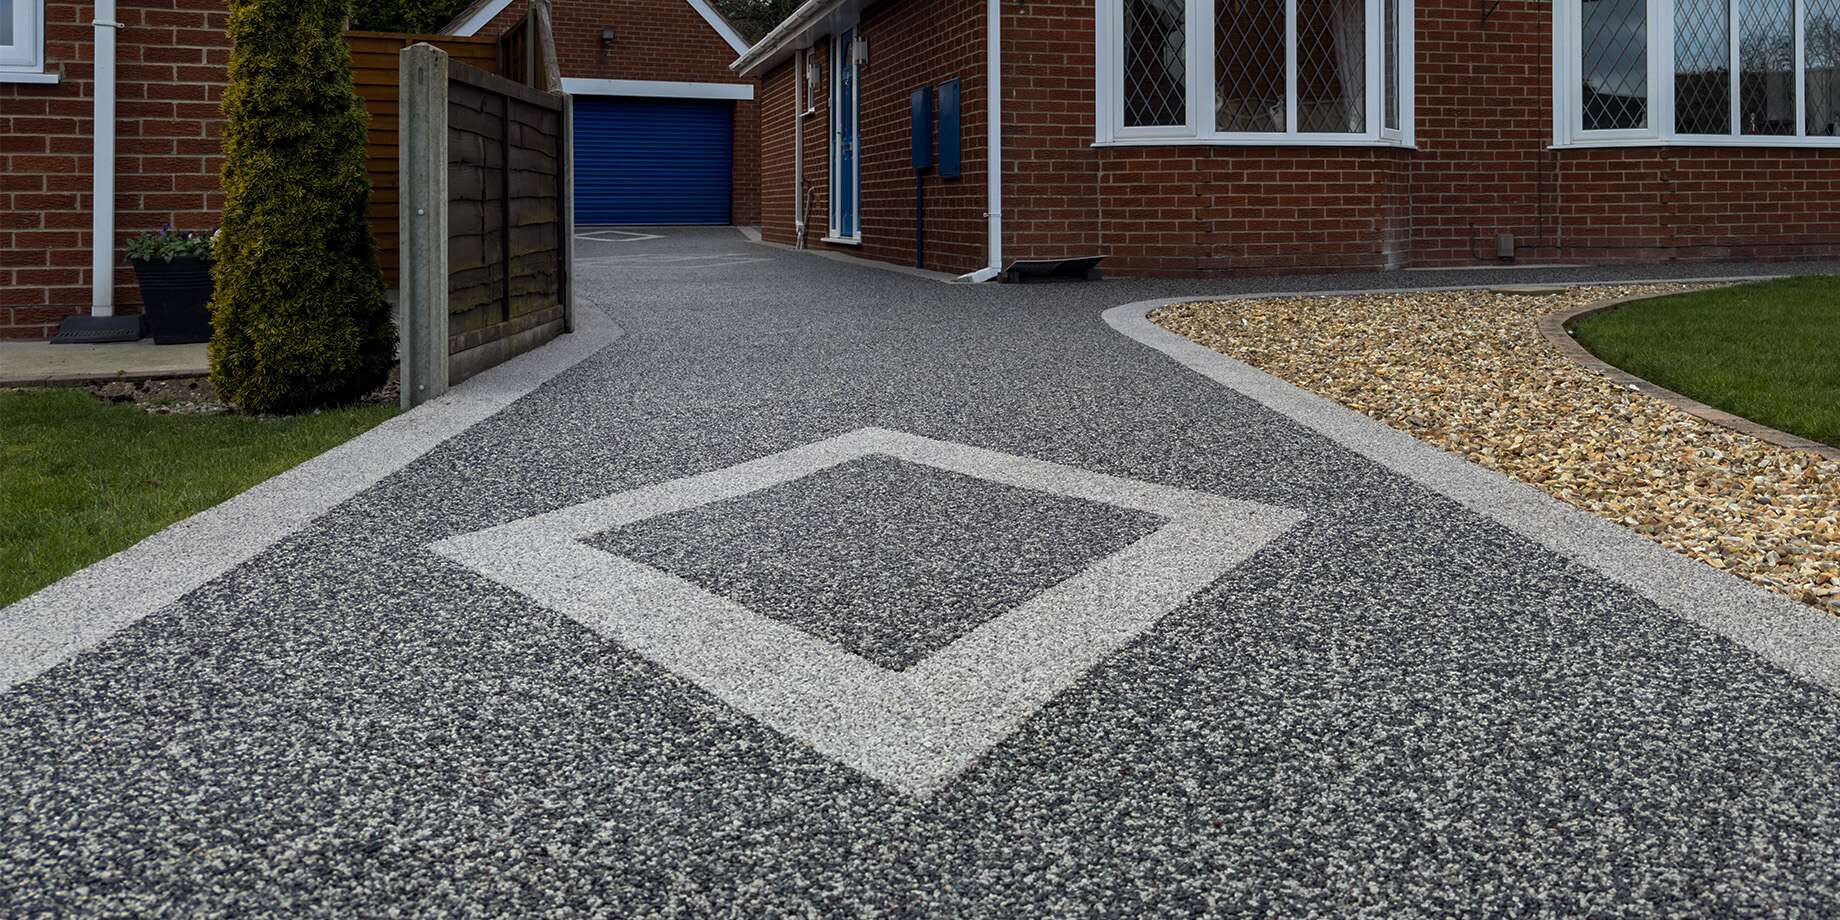 Stonebond Resin Driveways and Patios. Established 15+ Years.